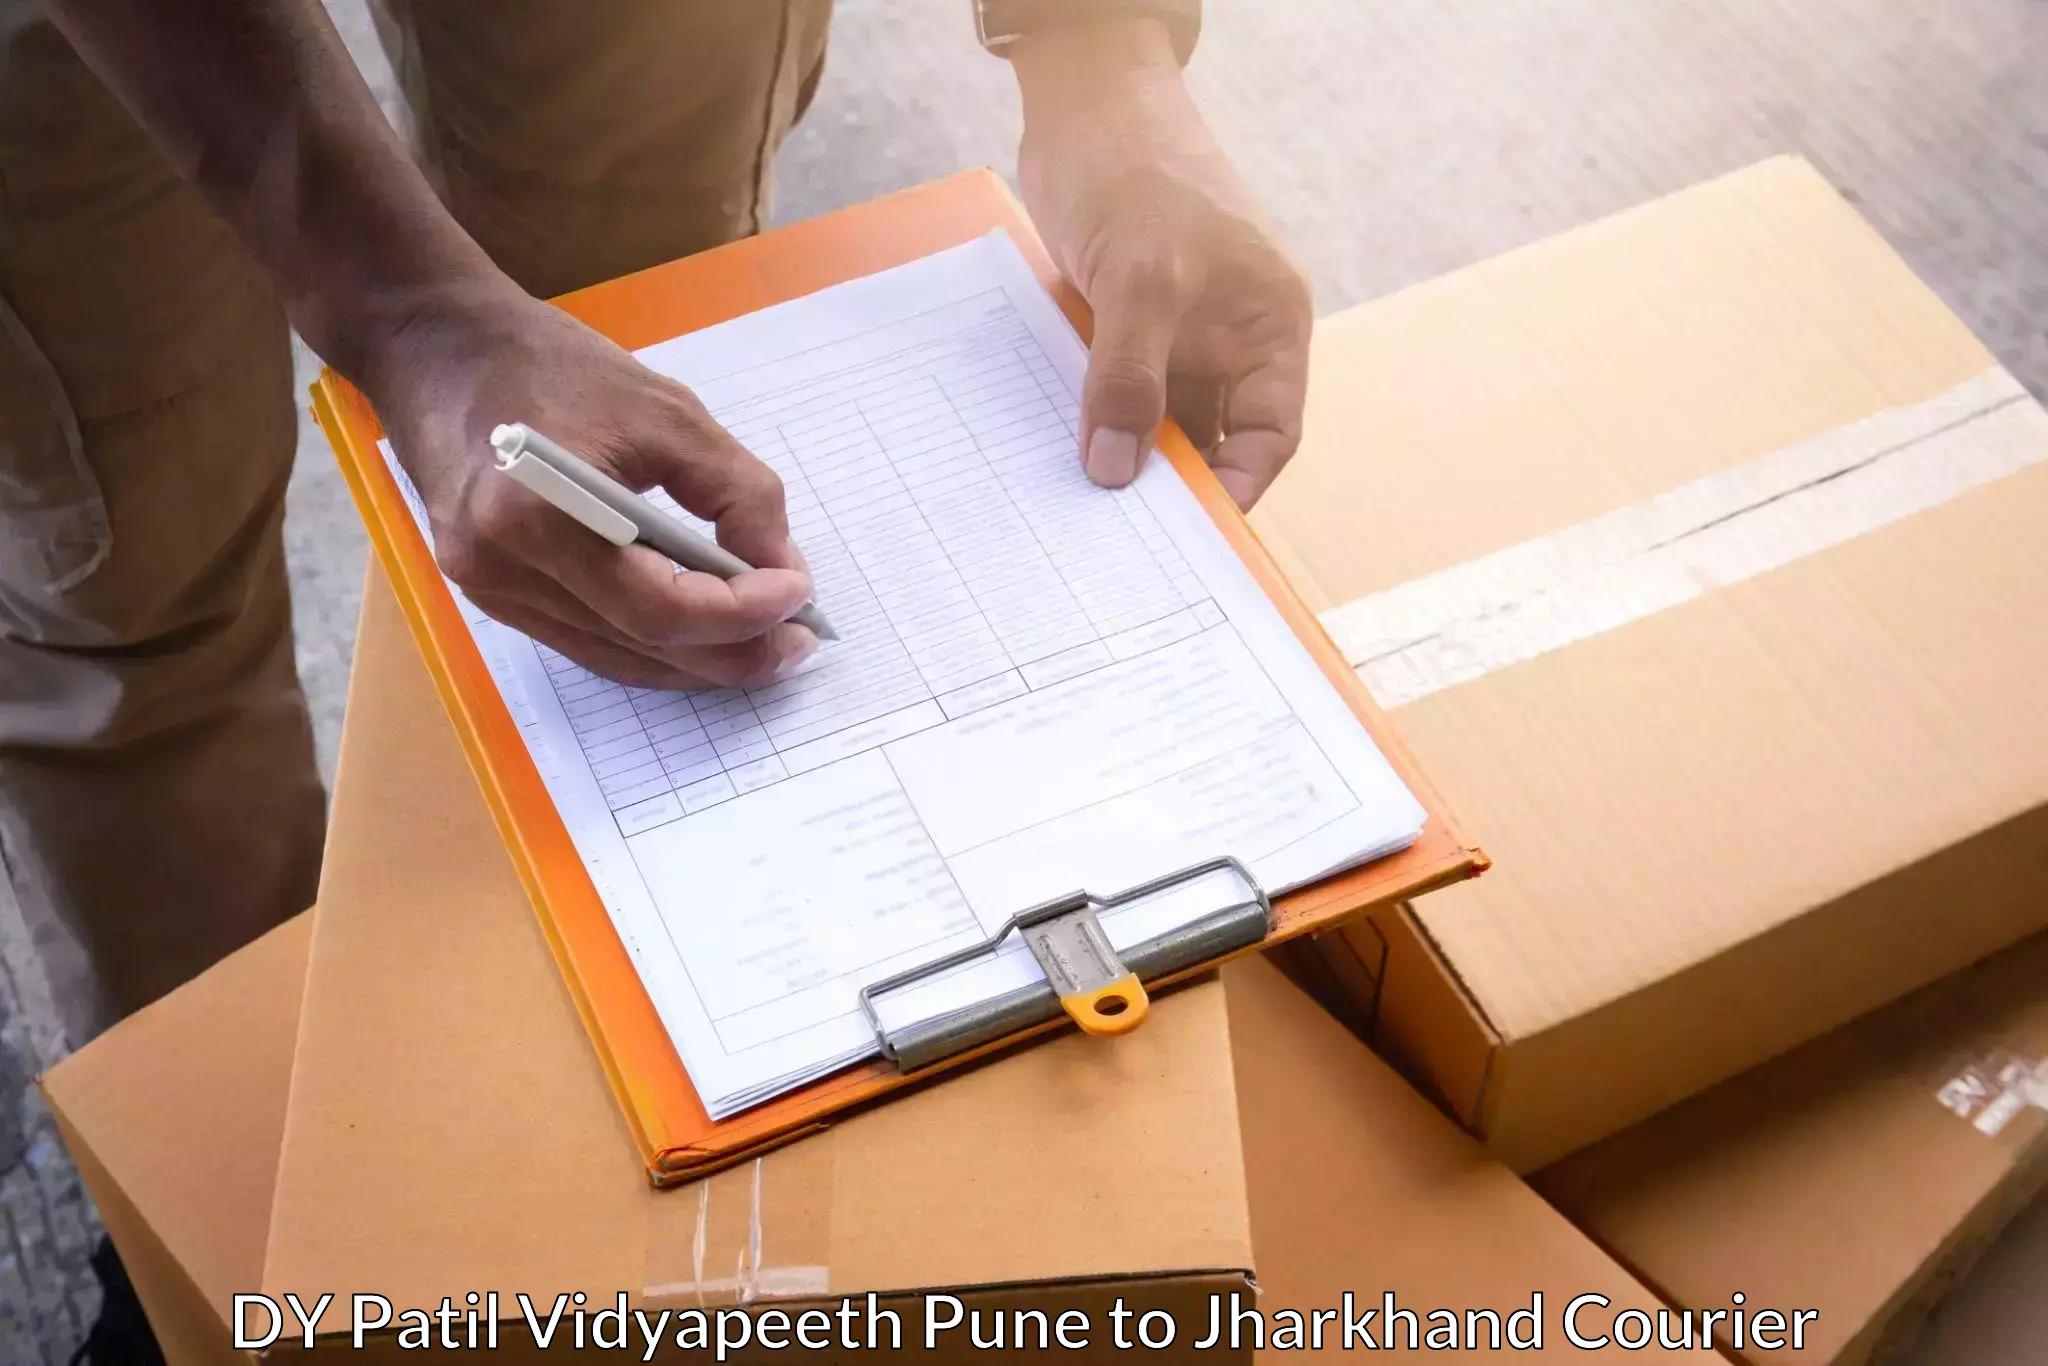 Express shipping in DY Patil Vidyapeeth Pune to Latehar